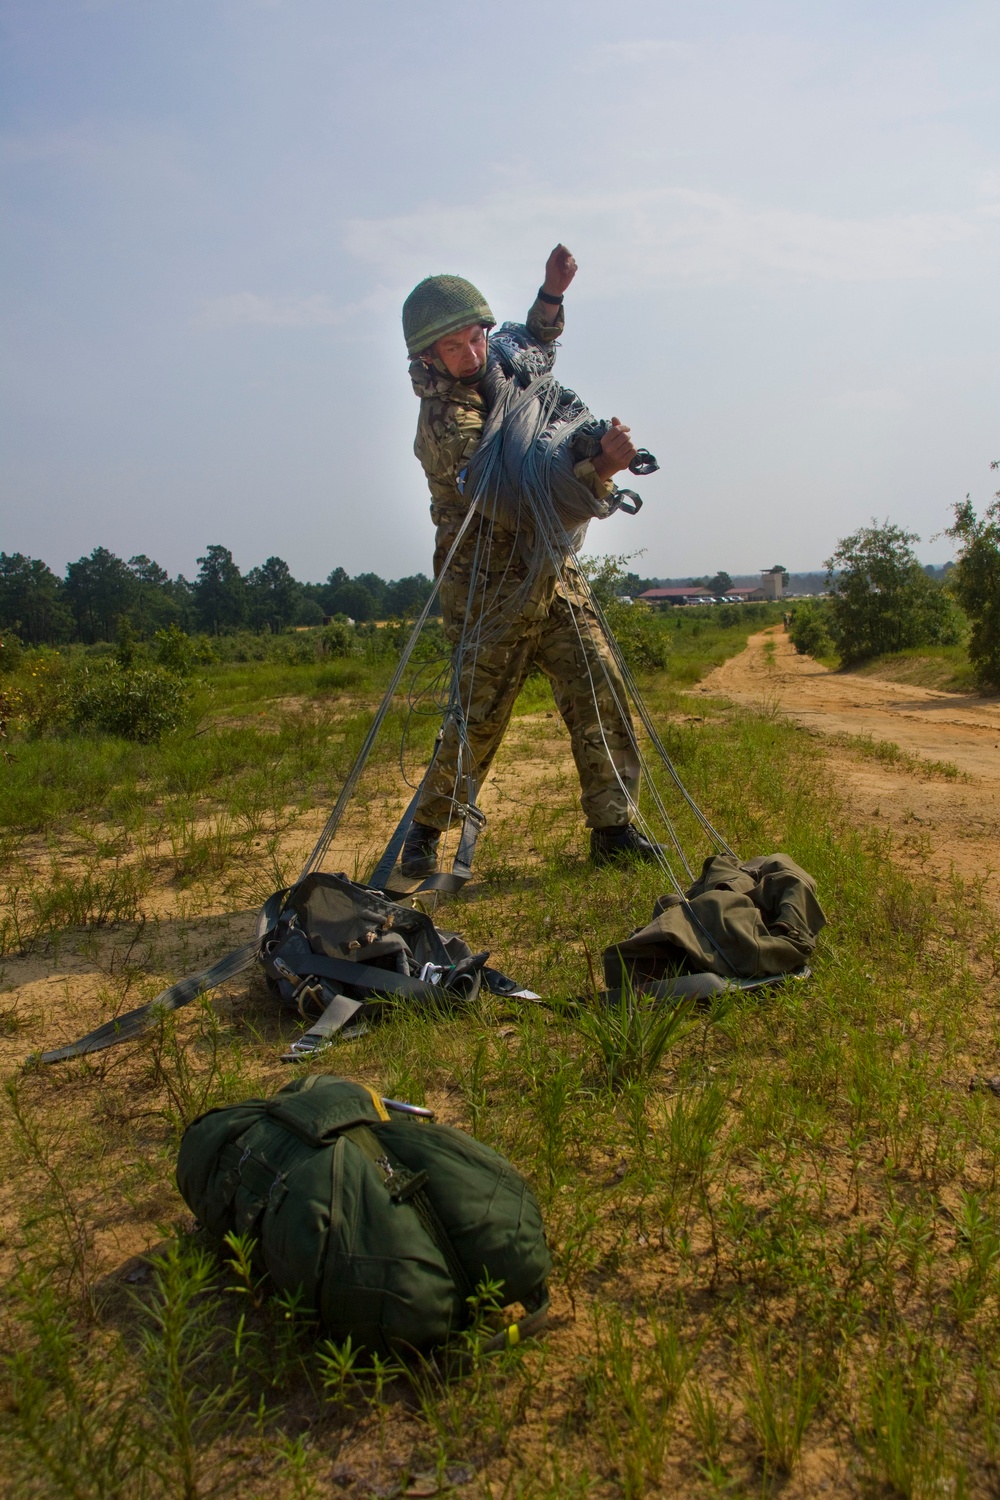 4th Parachute British Army Reserve soldiers participate in Operation Black Warrior with US Army Civil Affairs and Psychological Operations Command (Airborne)